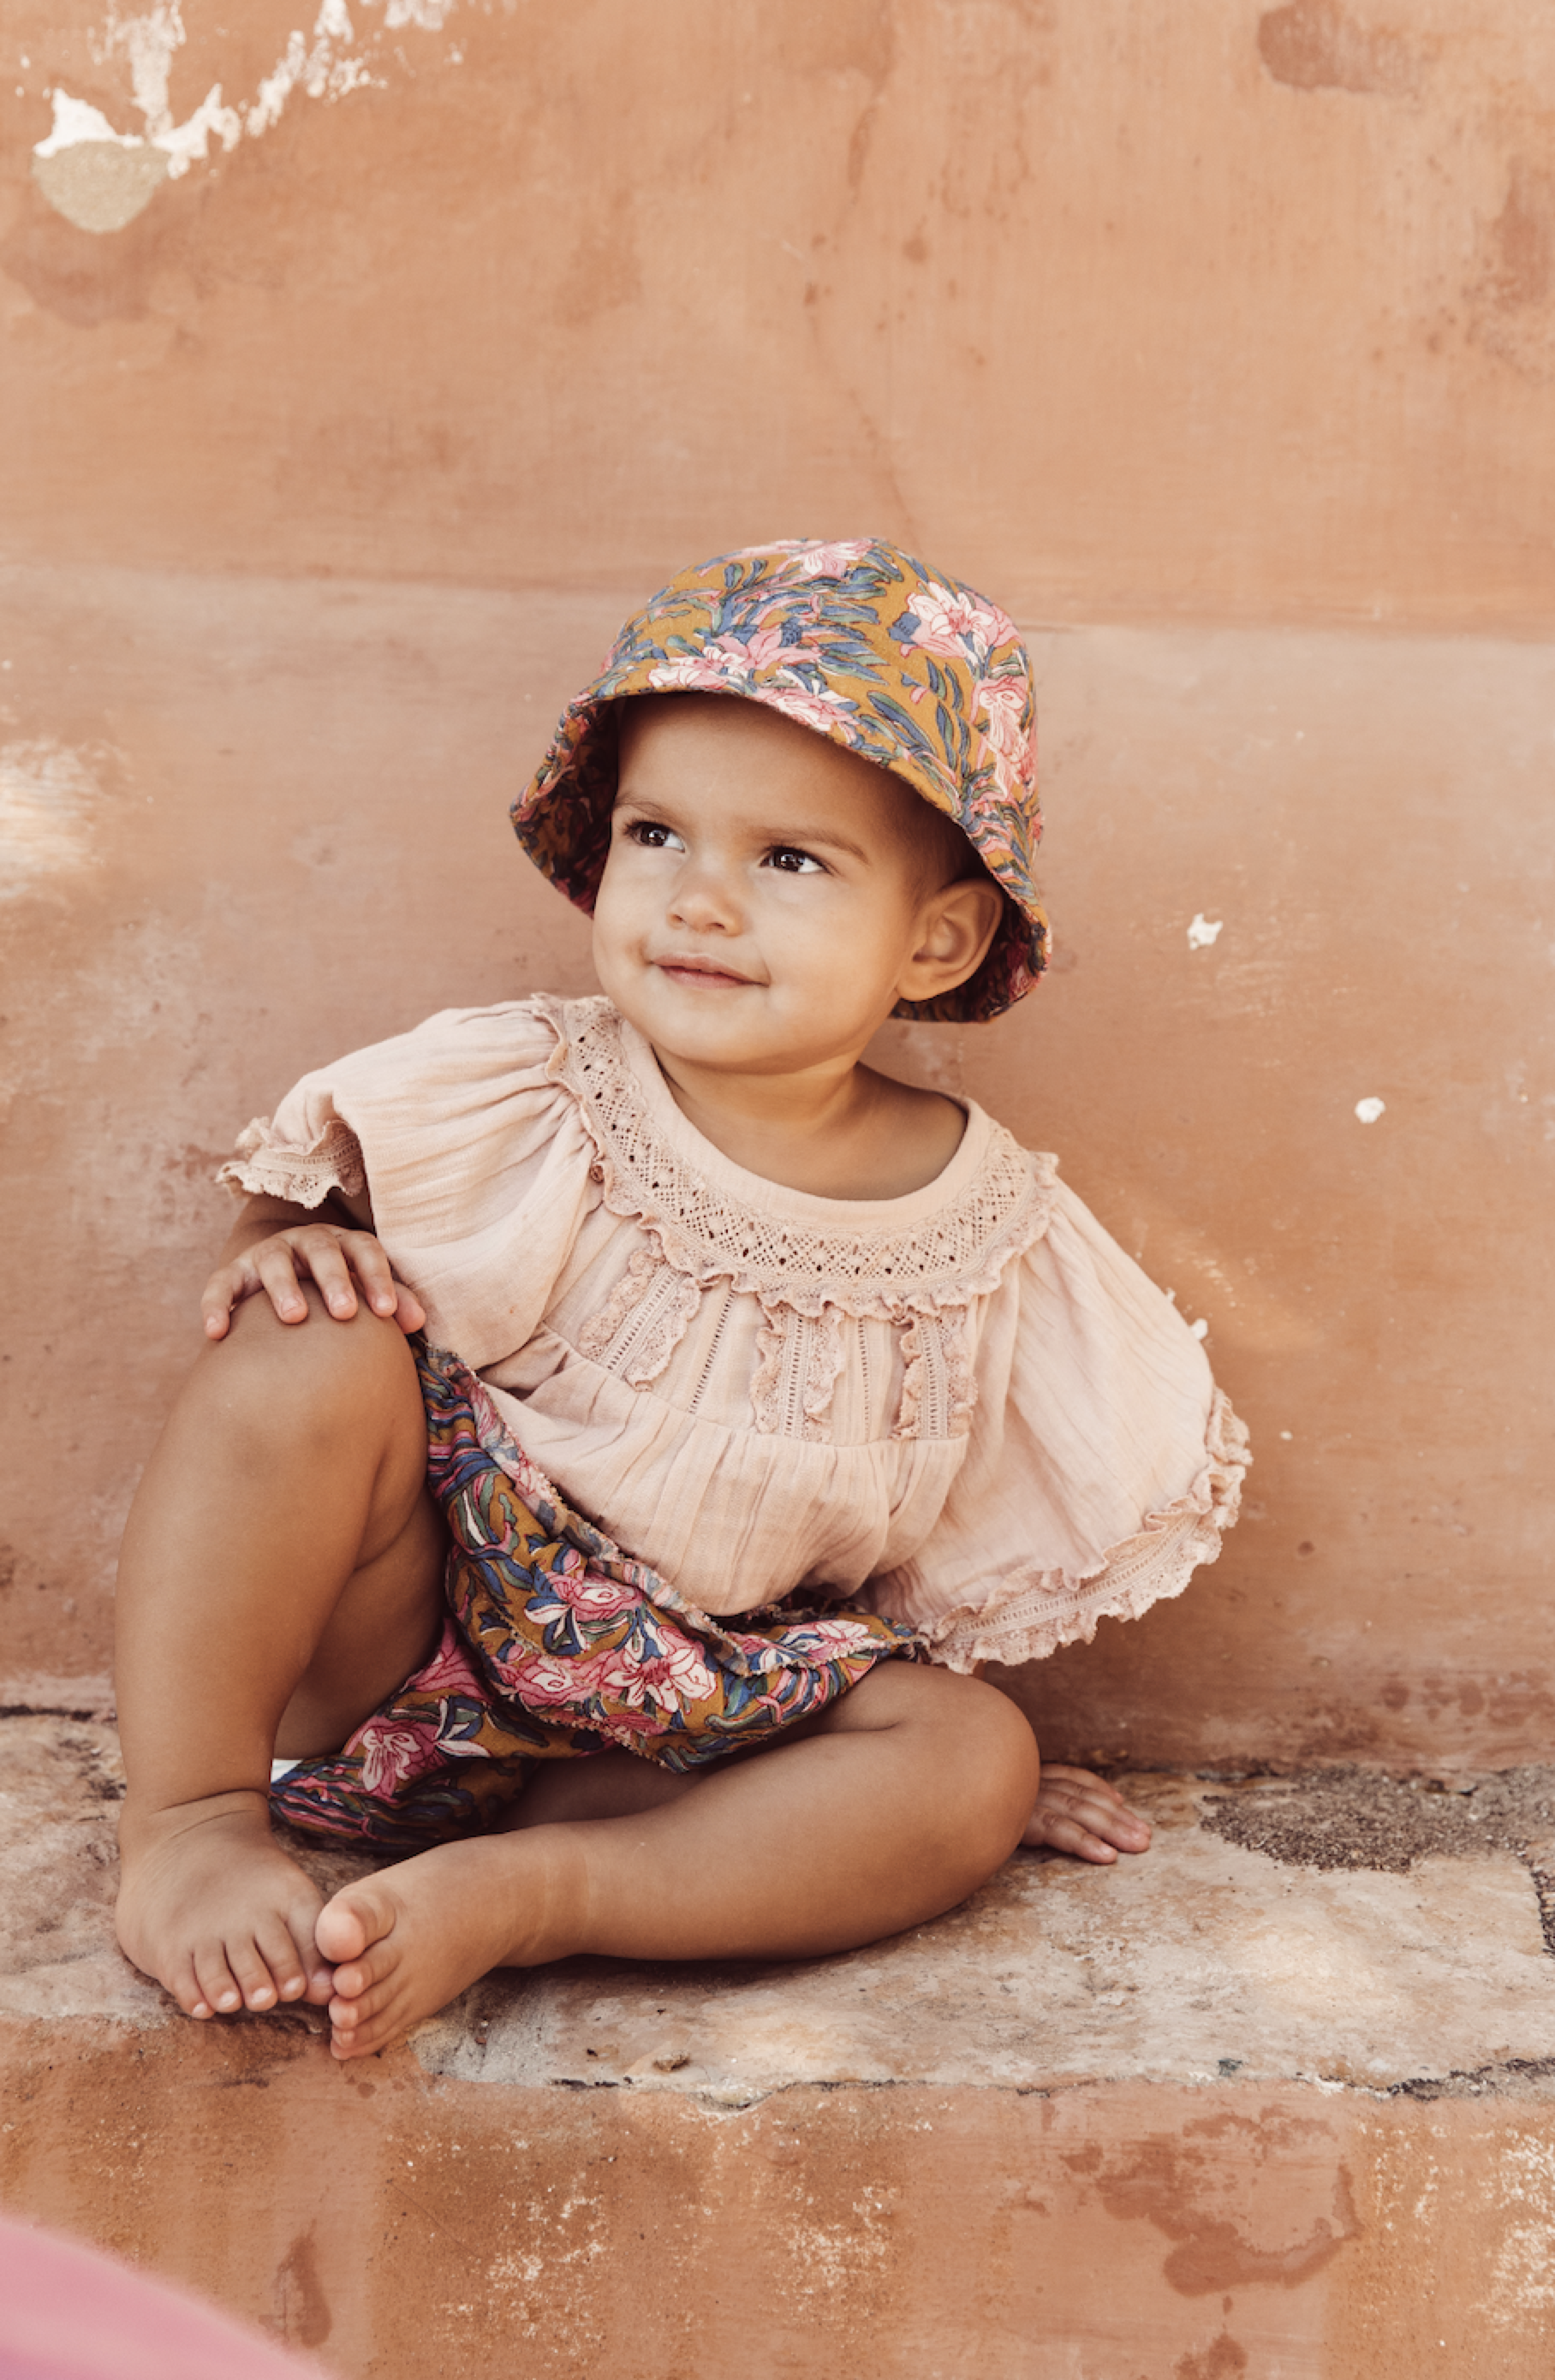 Baby Girls Pink Floral Hat